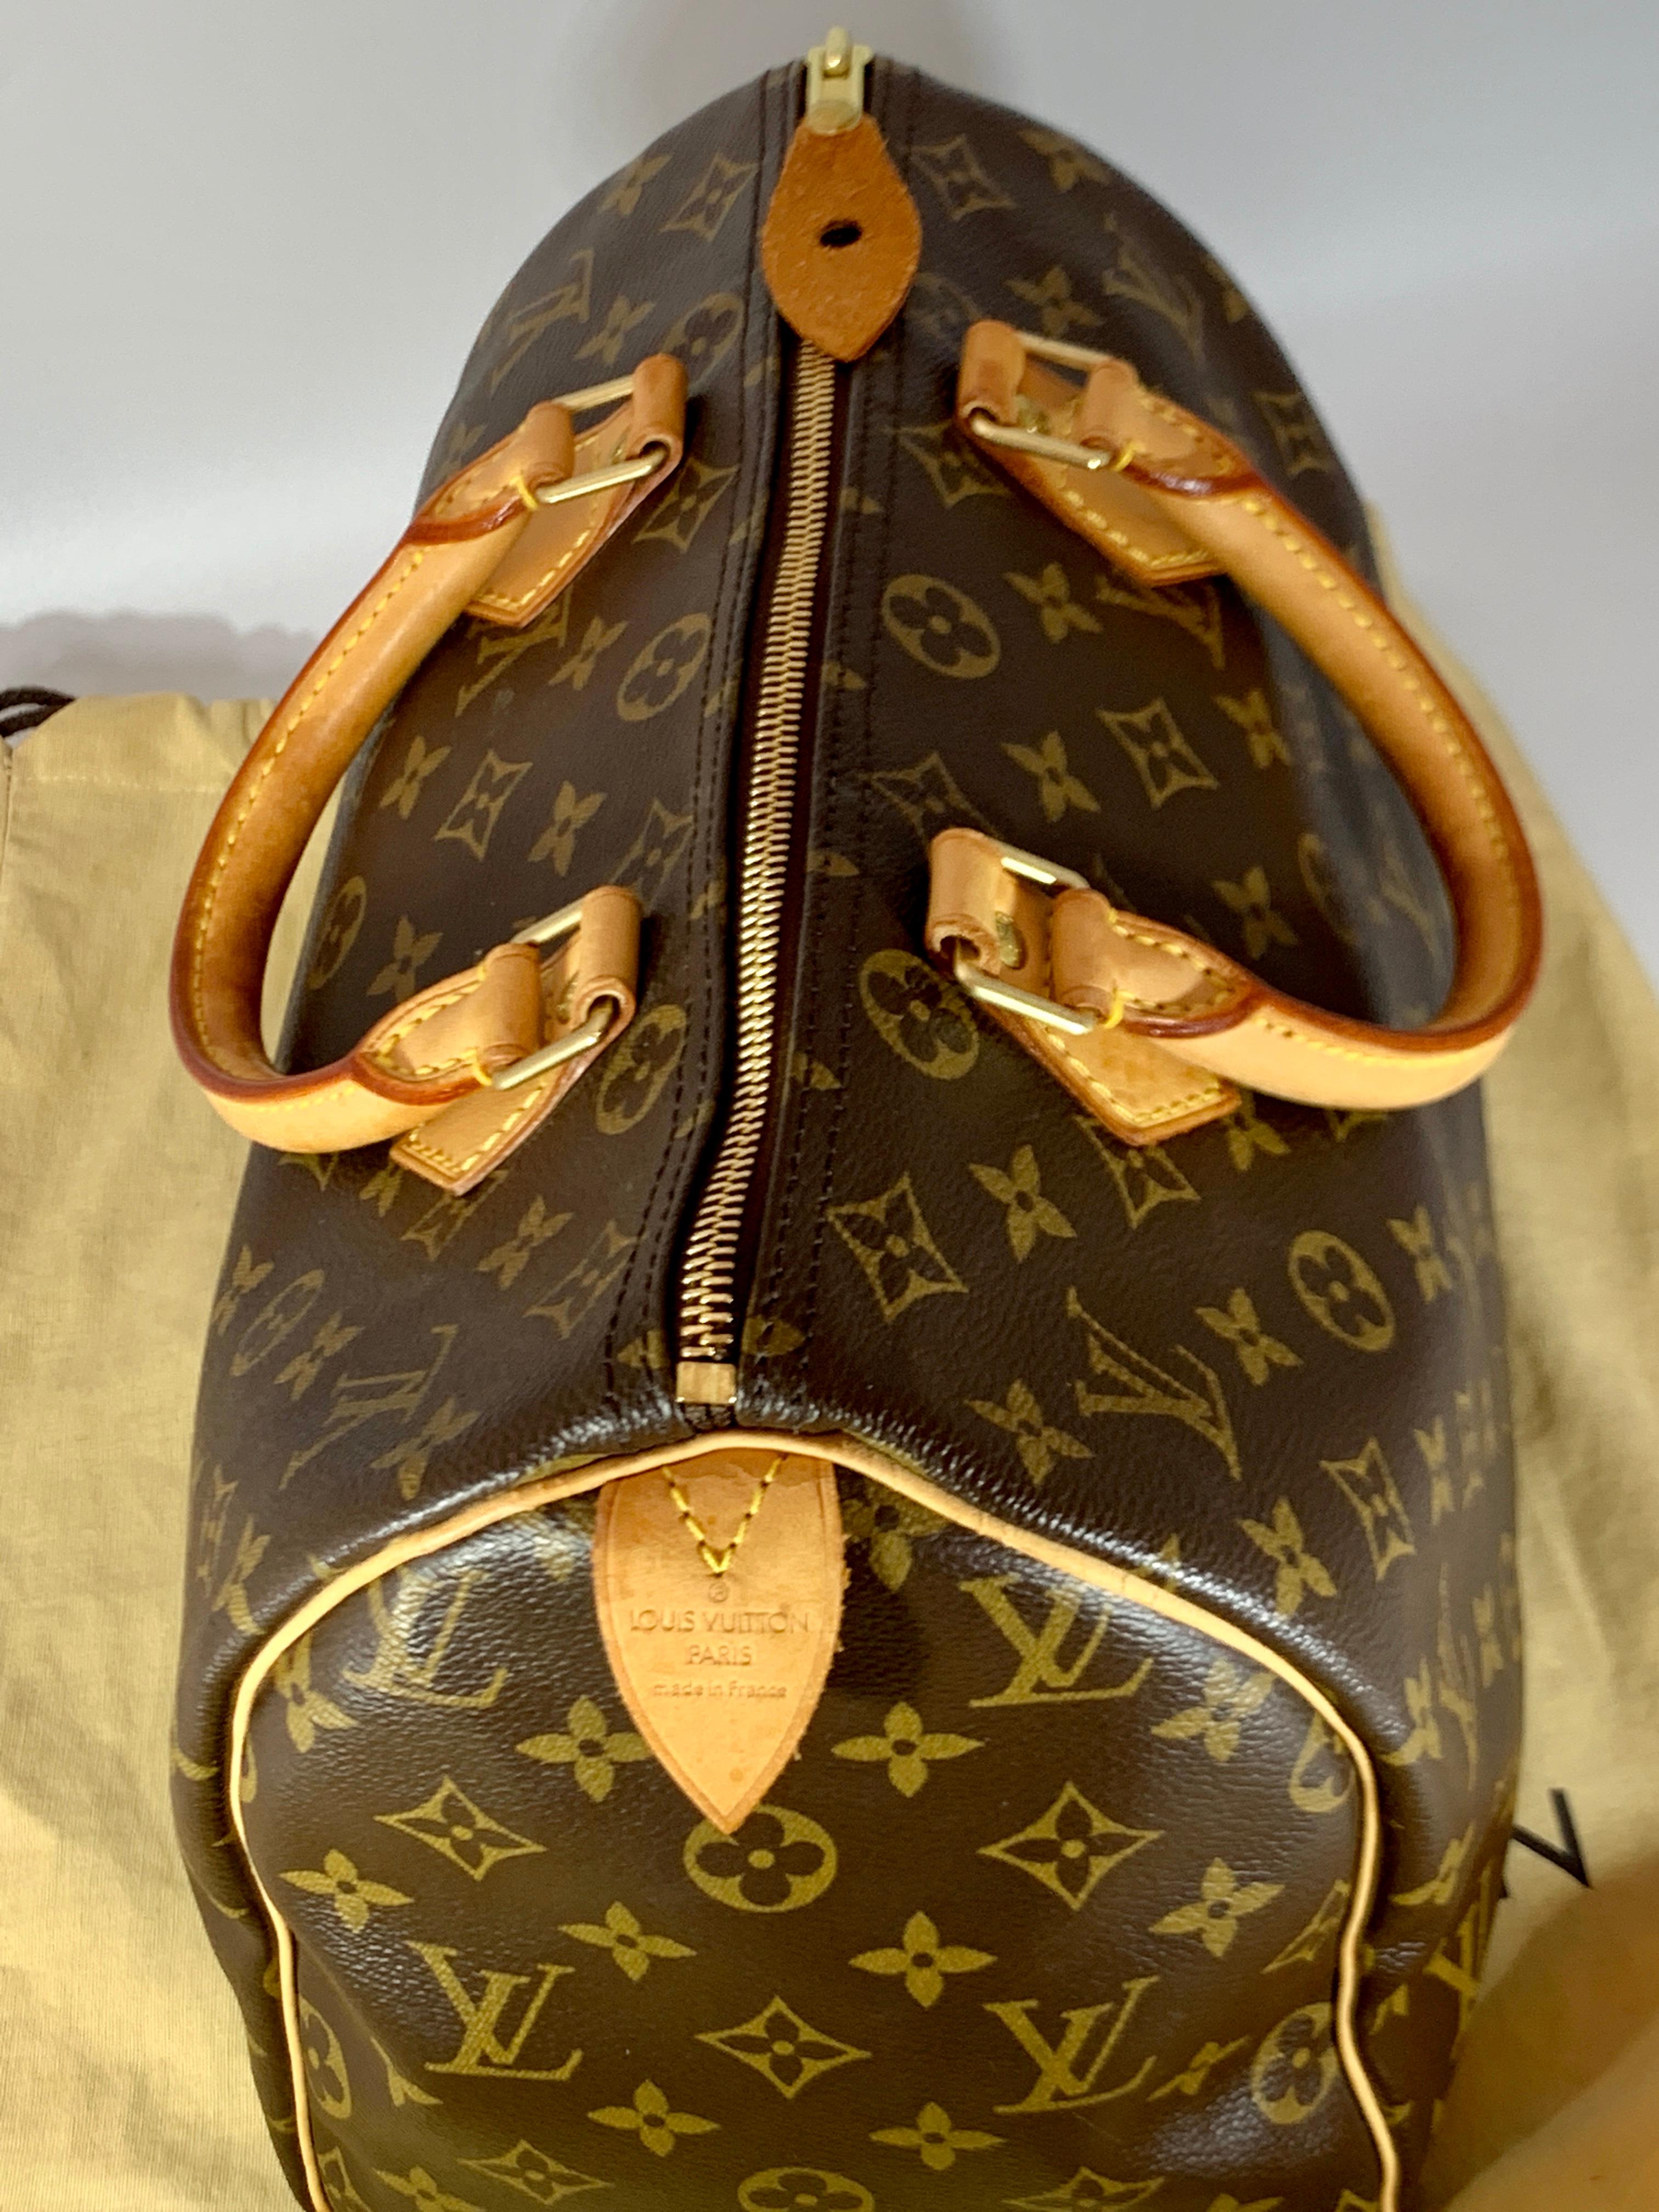 A Louis Vuitton logo-printed Louis Vuitton Speedy 35 with leather trim with bring a touch of heritage luxury wherever you carry it.
Over all Excellent condition, Like new
No stain , no fading , lining is in great shape
No Louis Vuitton dust